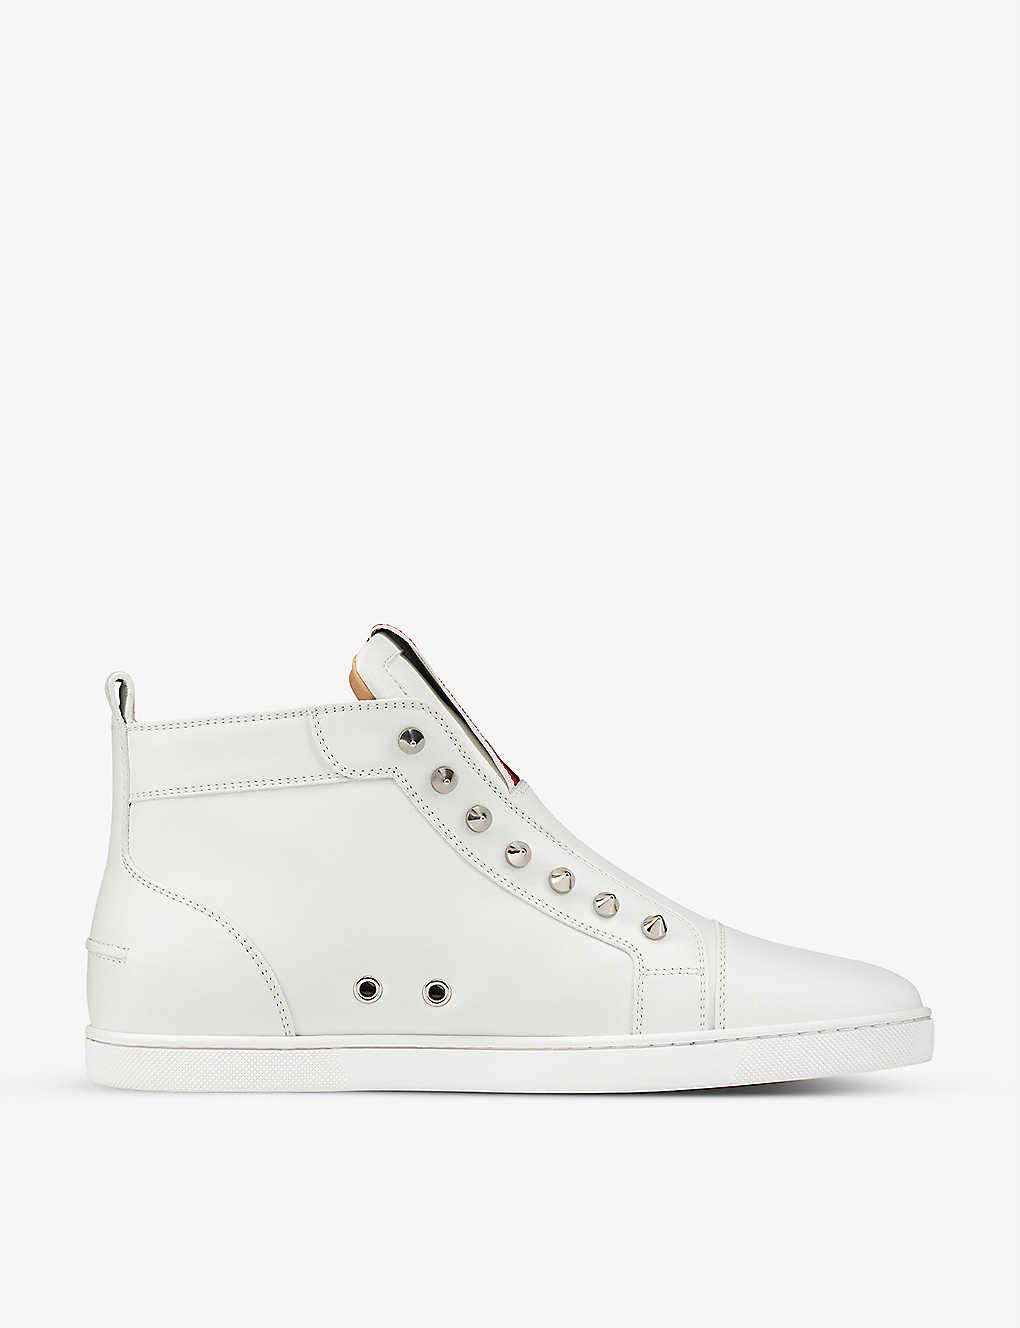 Christian Louboutin F.a.v Fique A Vontade Leather High-top Trainers in ...